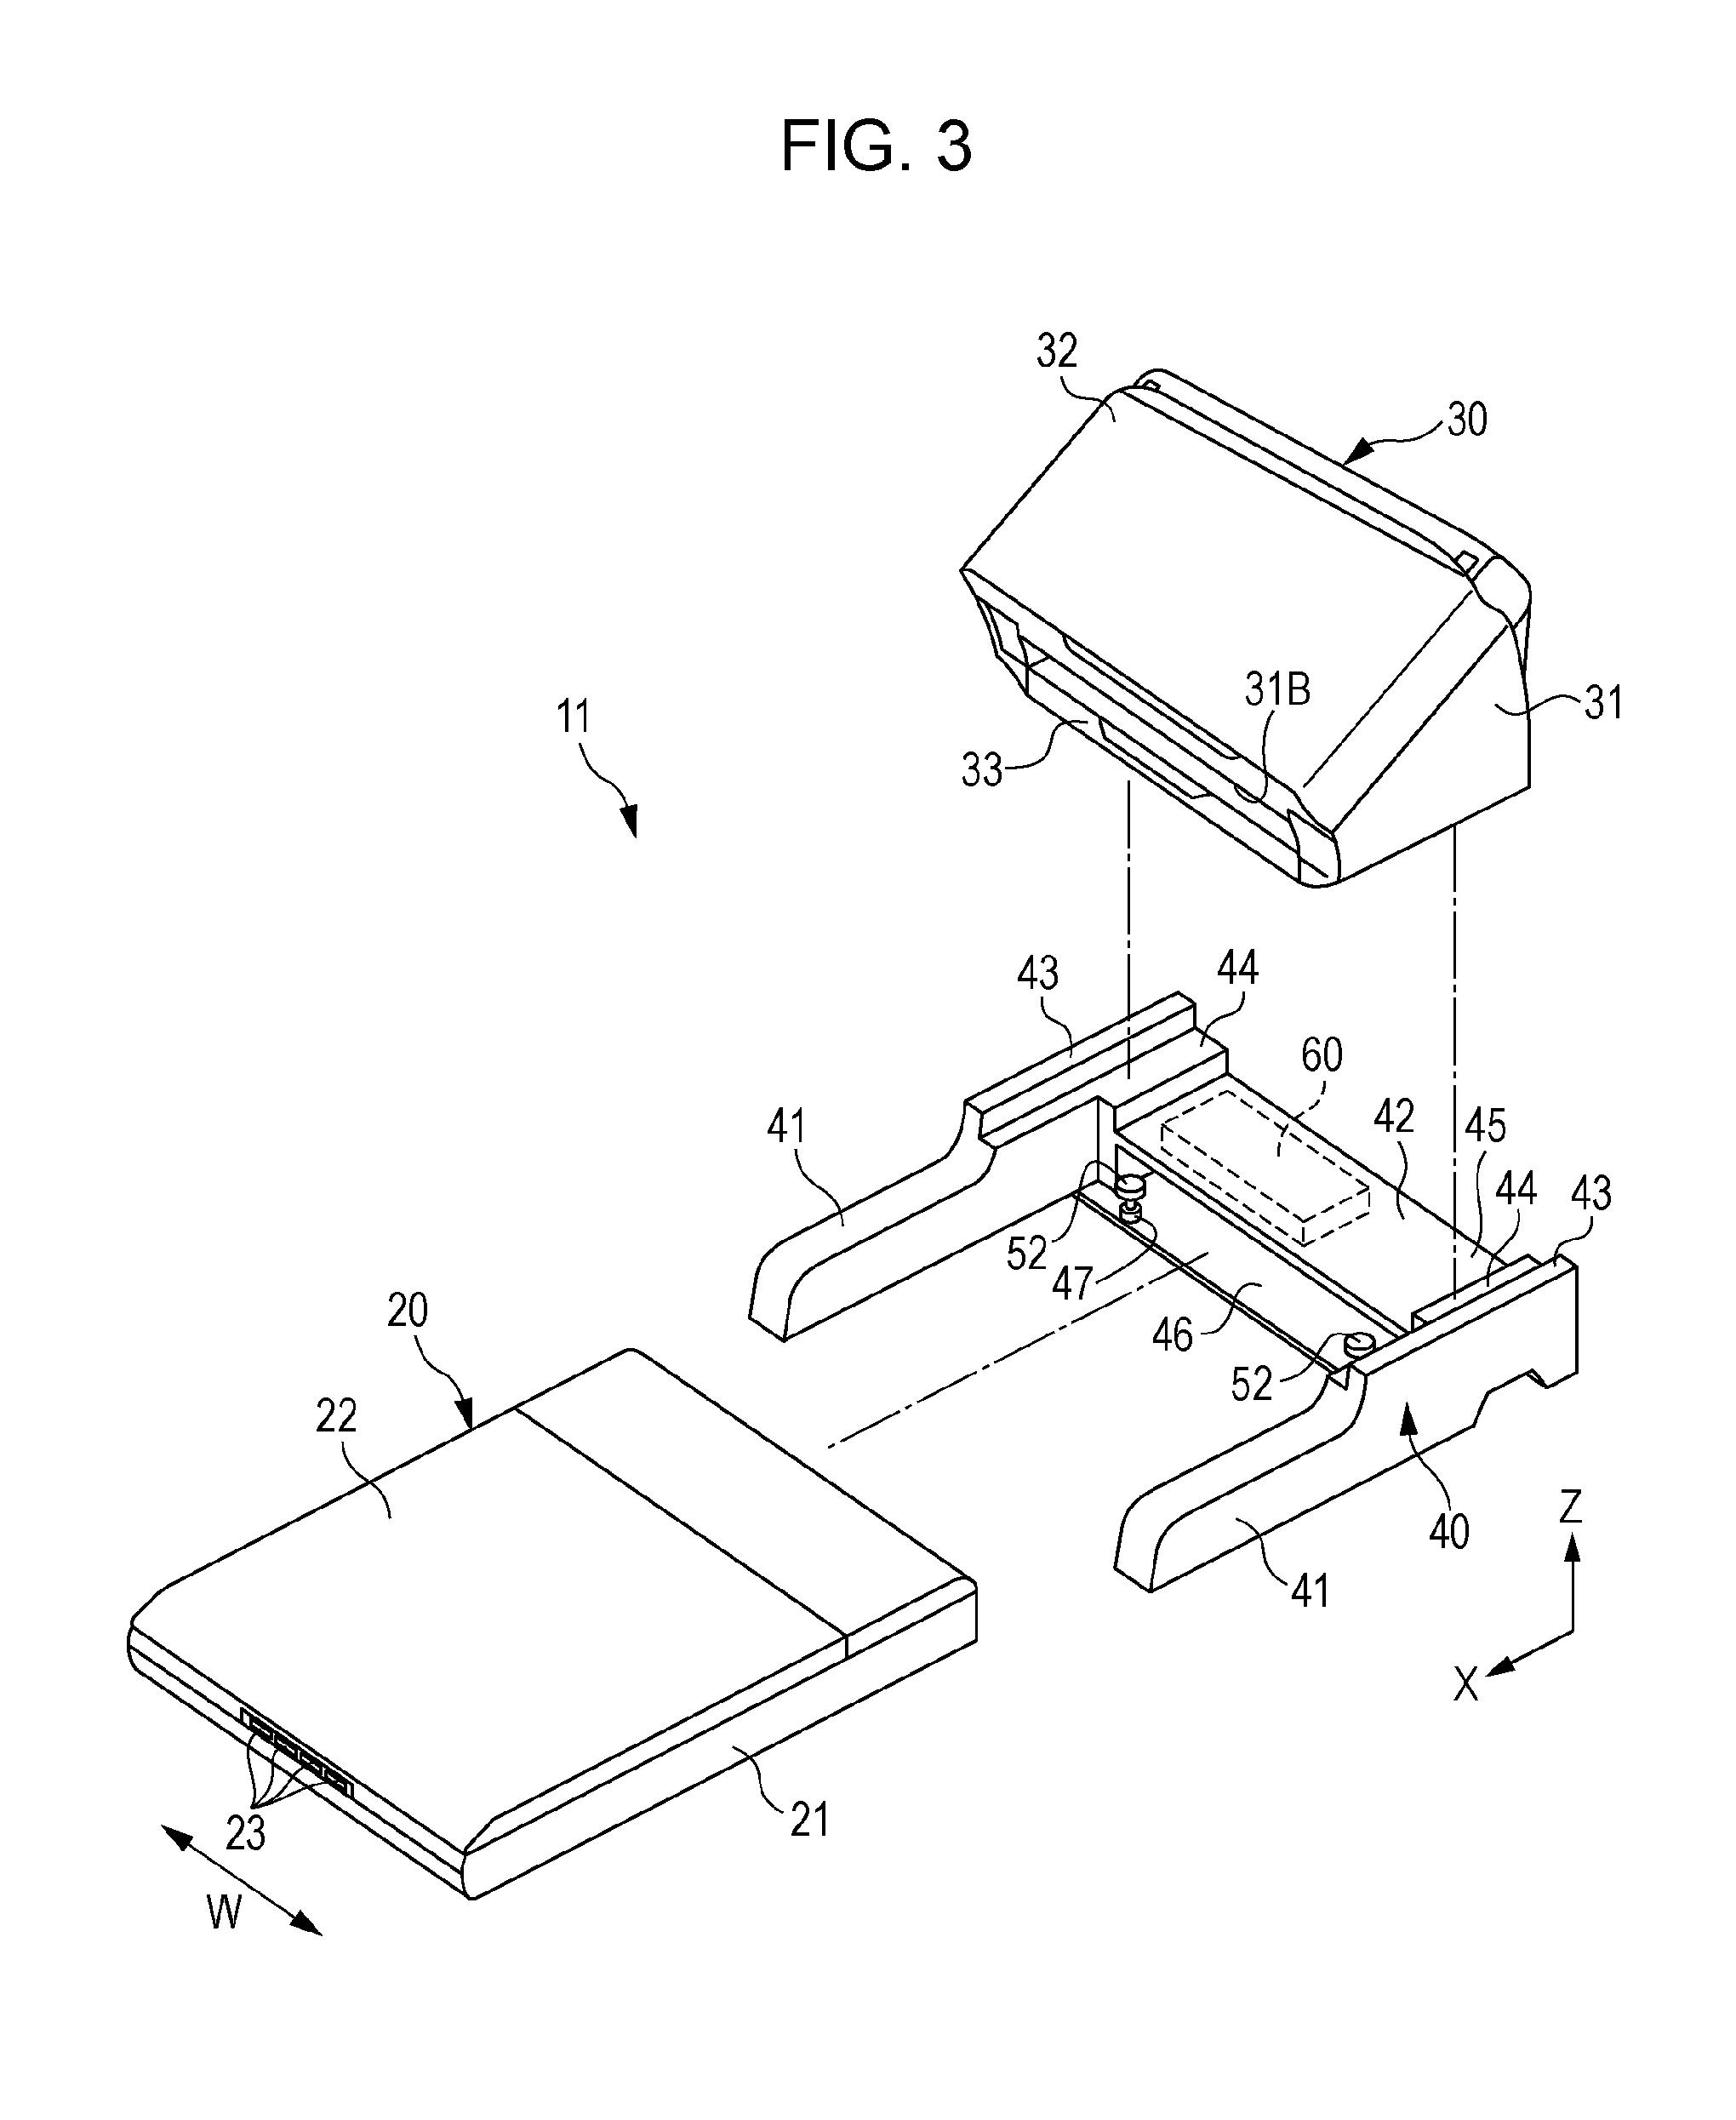 Image formation system and connection unit